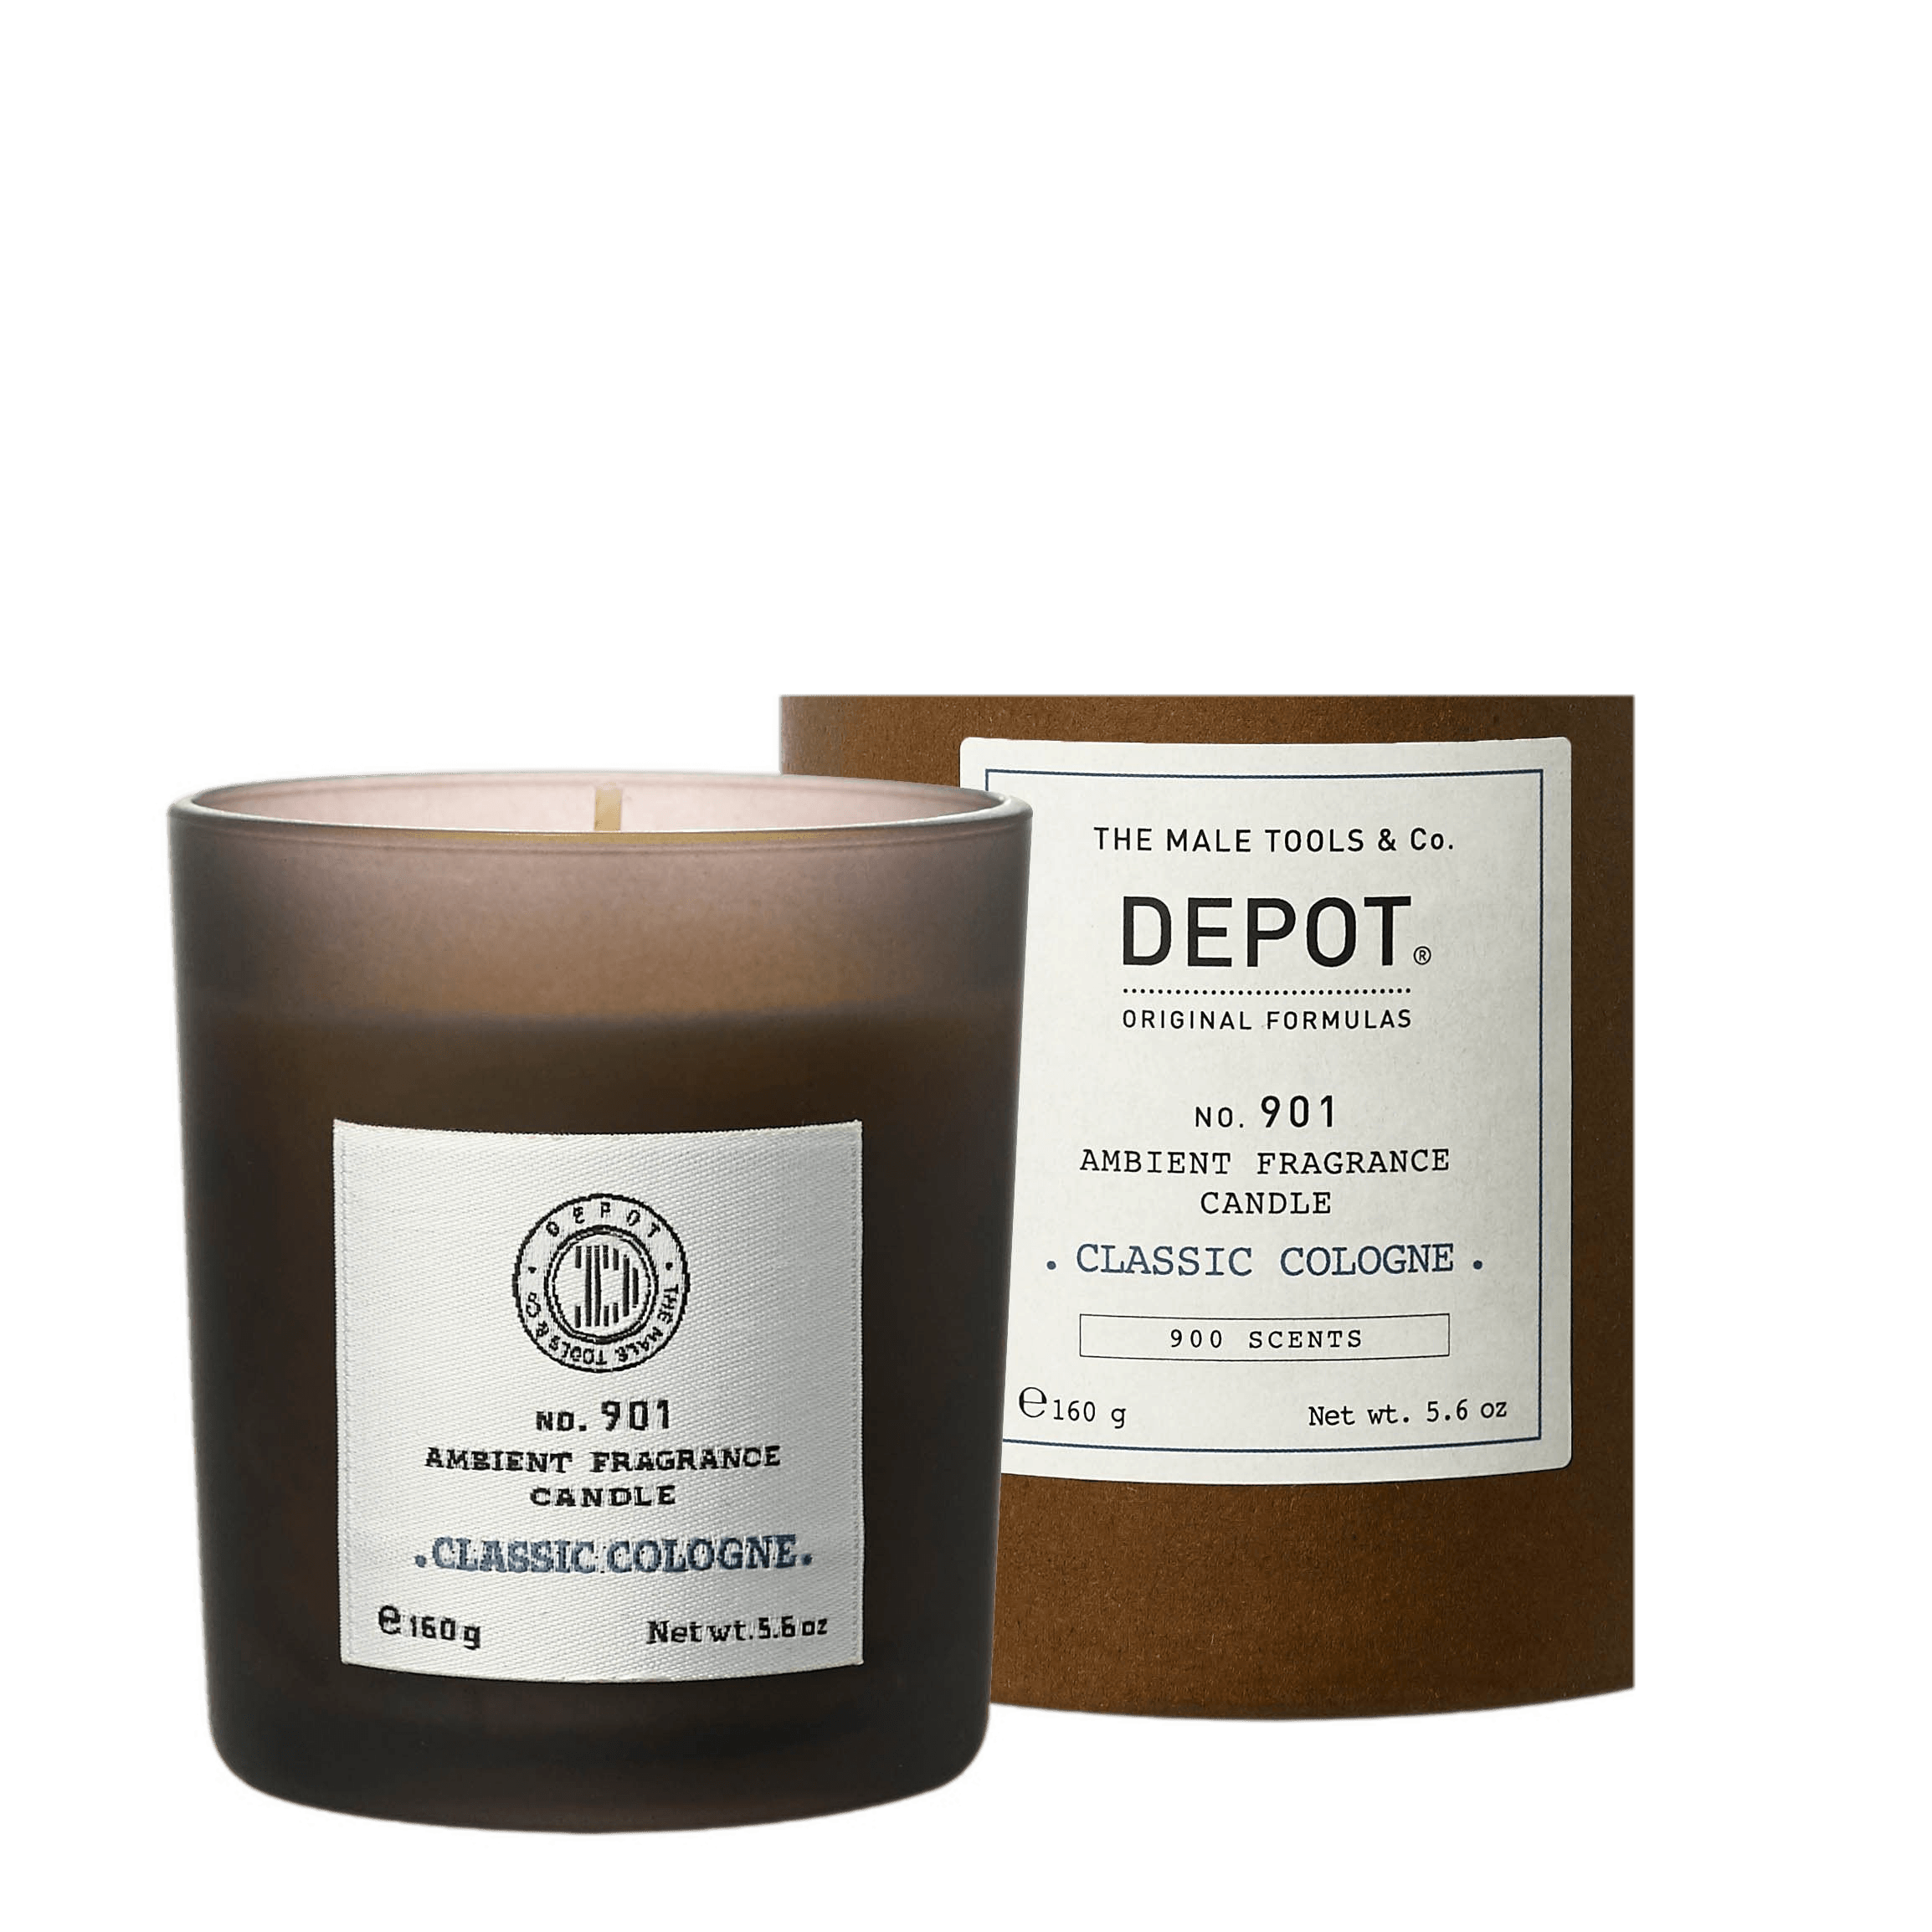 Depot No. 901 Ambient Fragrance Candle Classic Cologne